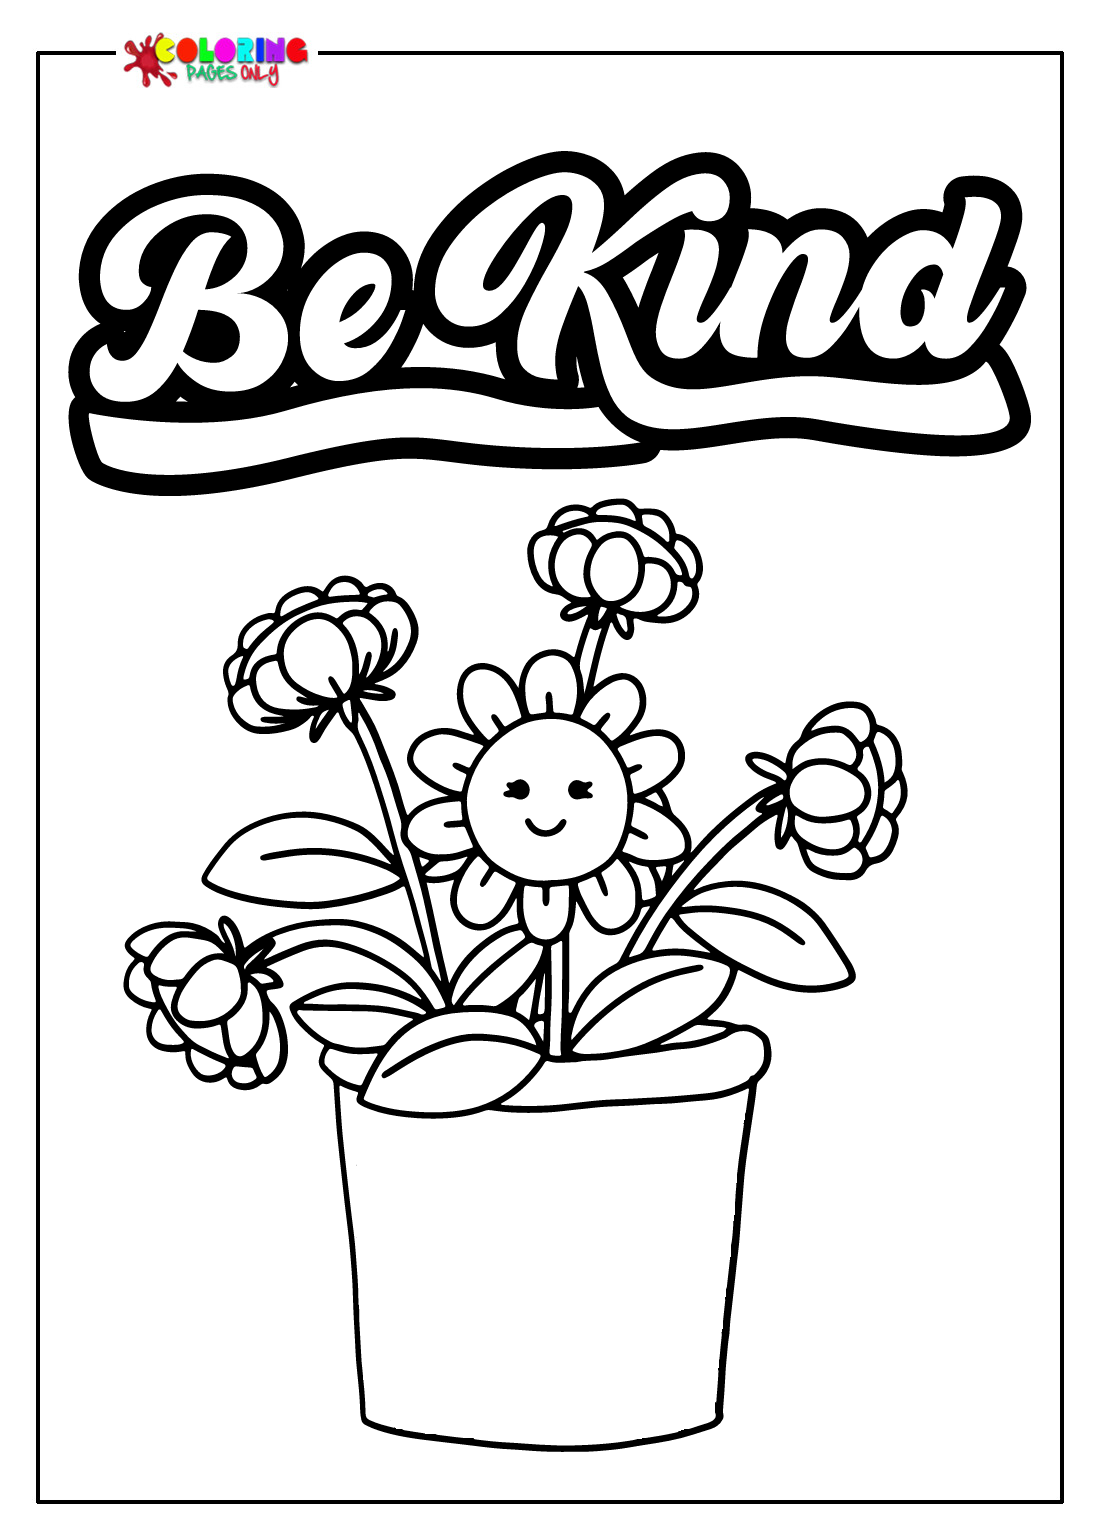 Be Kind to Print Coloring Page